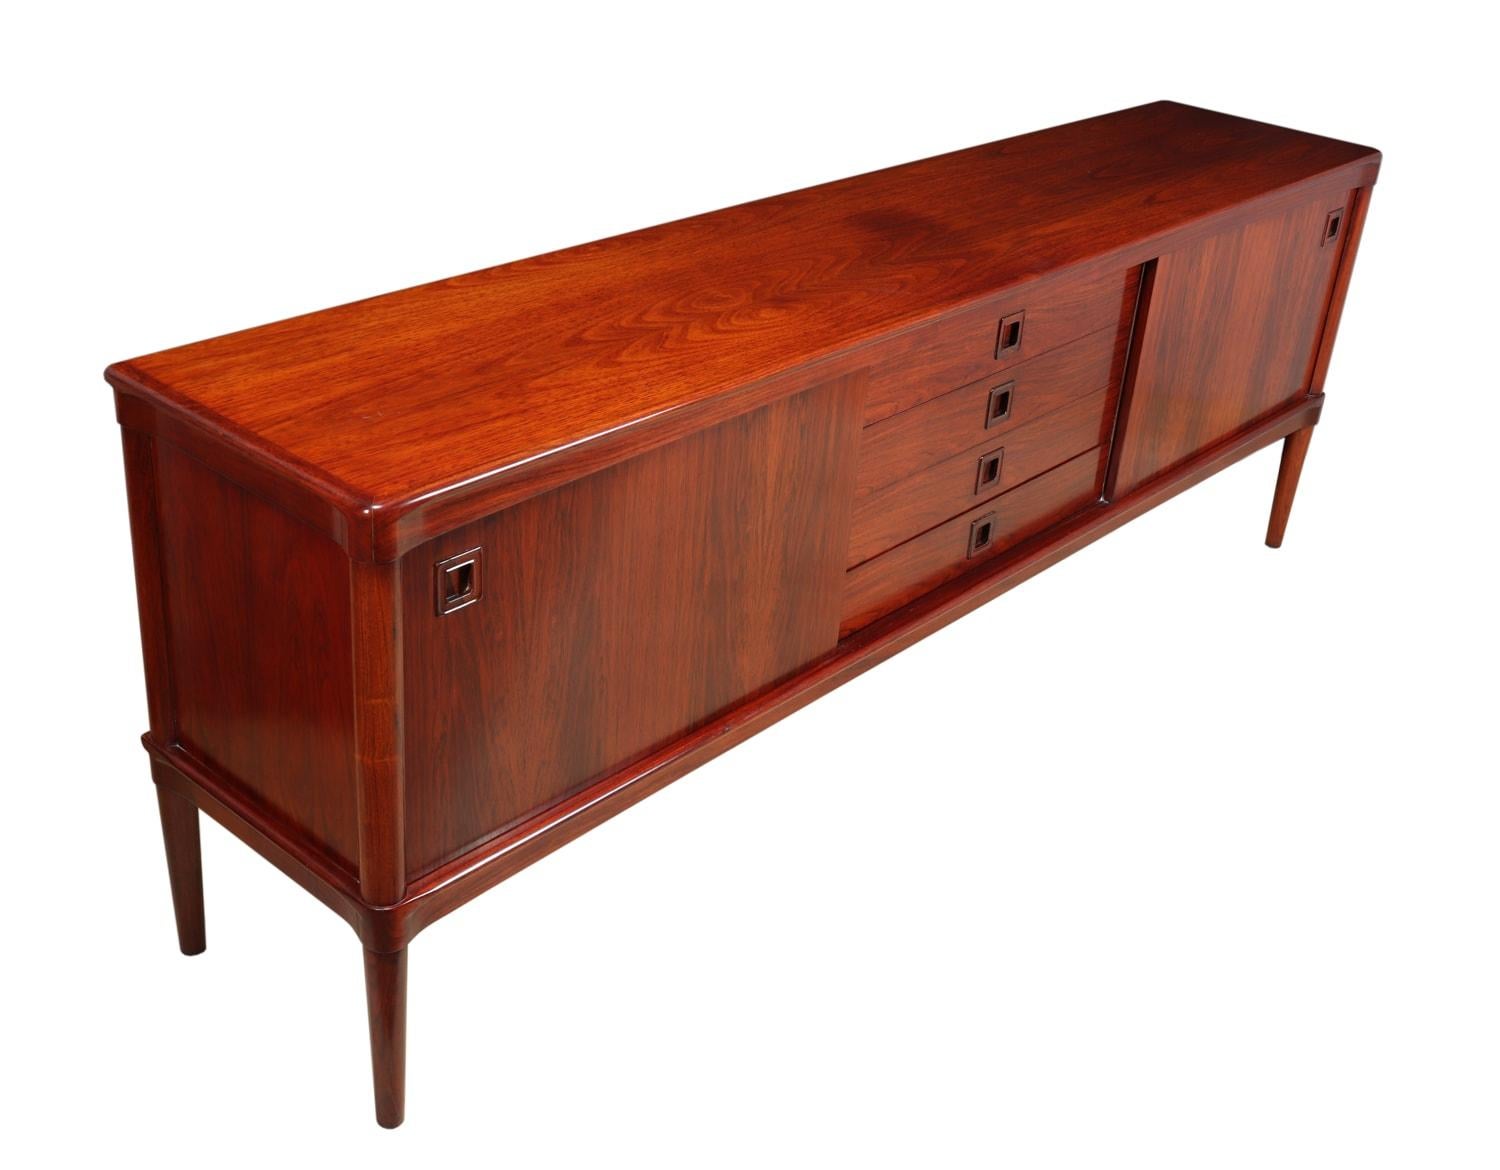 Midcentury rosewood sideboard by Bramin circa 1960s
Midcentury rosewood sideboard produced in circa 1960s by Bramin and designed by H W Klien This midcentury, Danish, rosewood sideboard has 2 sliding doors, with shelves behind 4 central drawers,